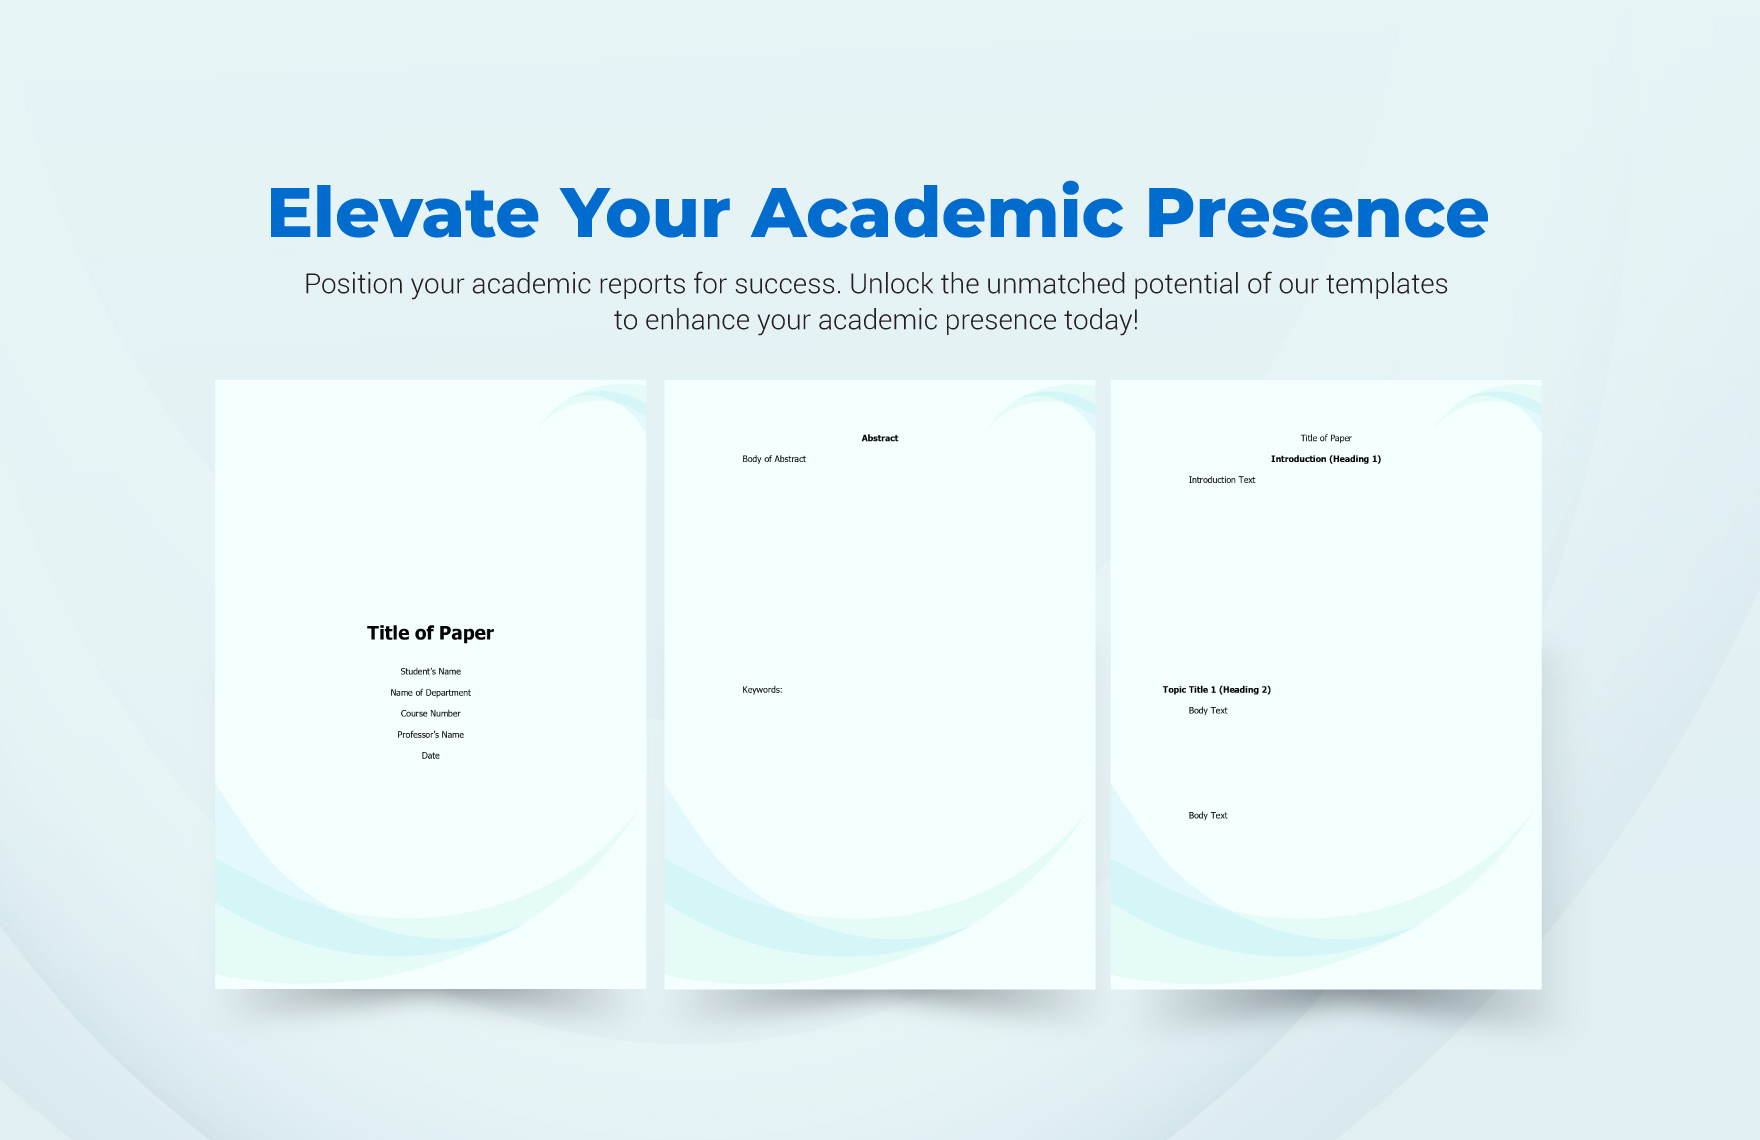 Academic Paper Layout Template